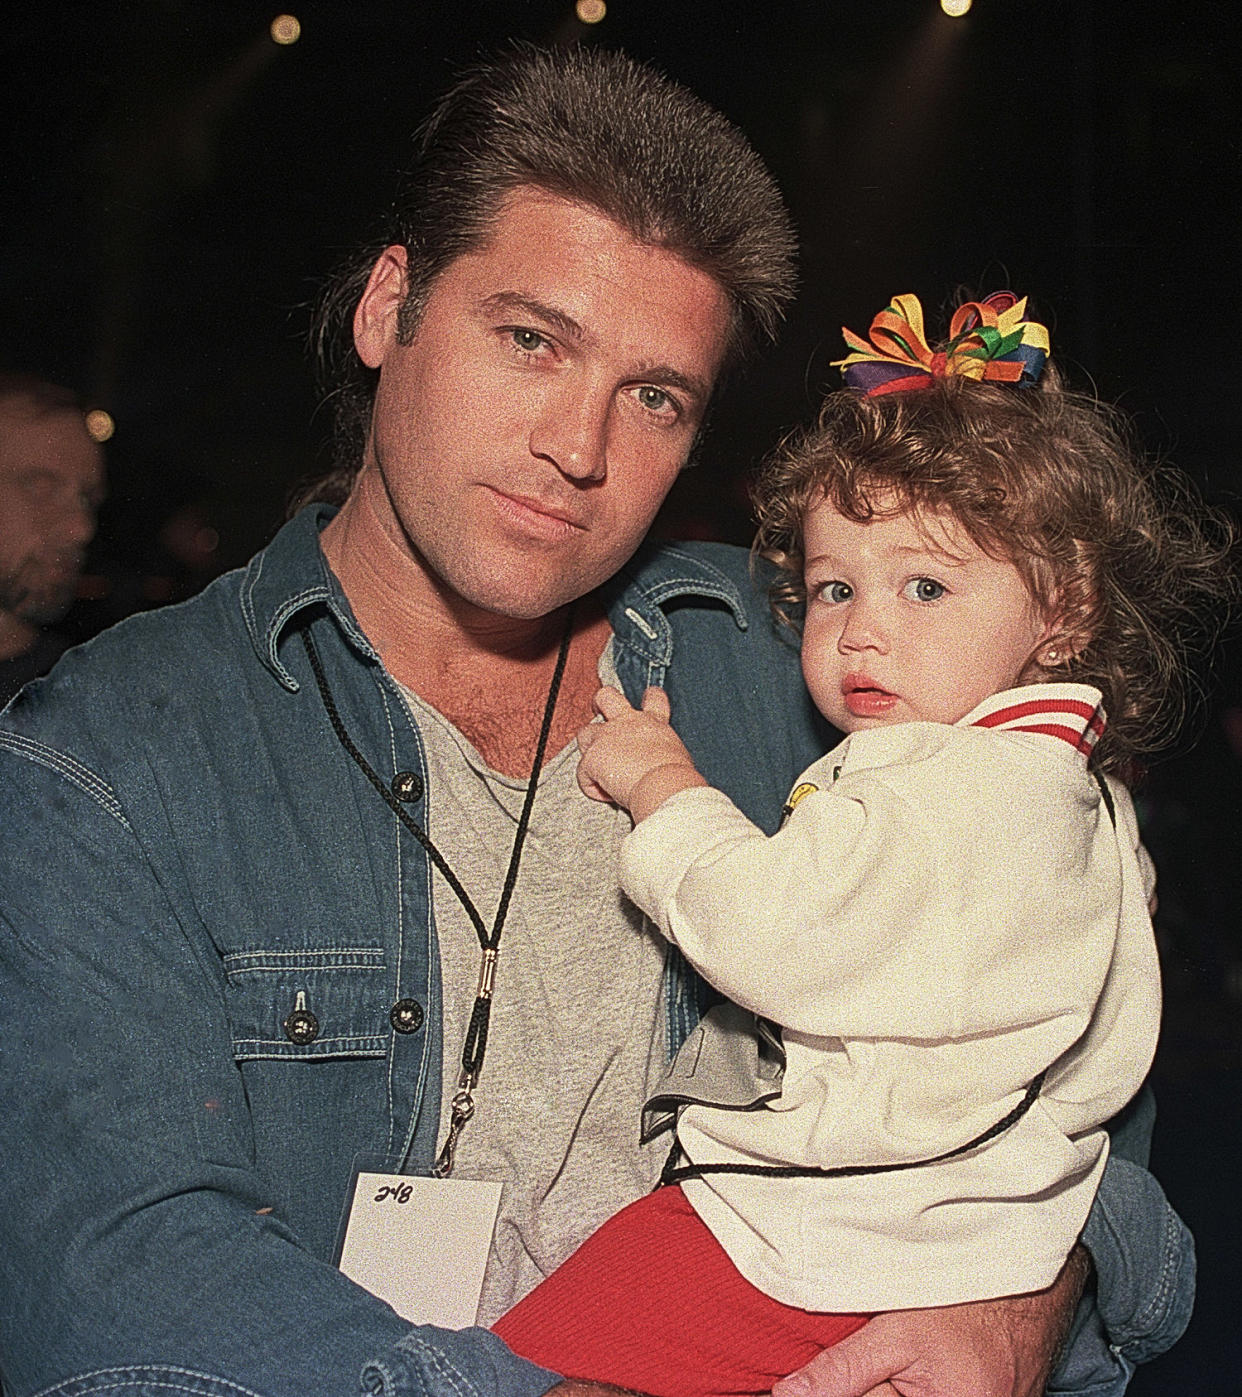 Billy Ray Cyrus and daughter Miley Cyrus in 1994 (Rick Diamond / Getty Images)